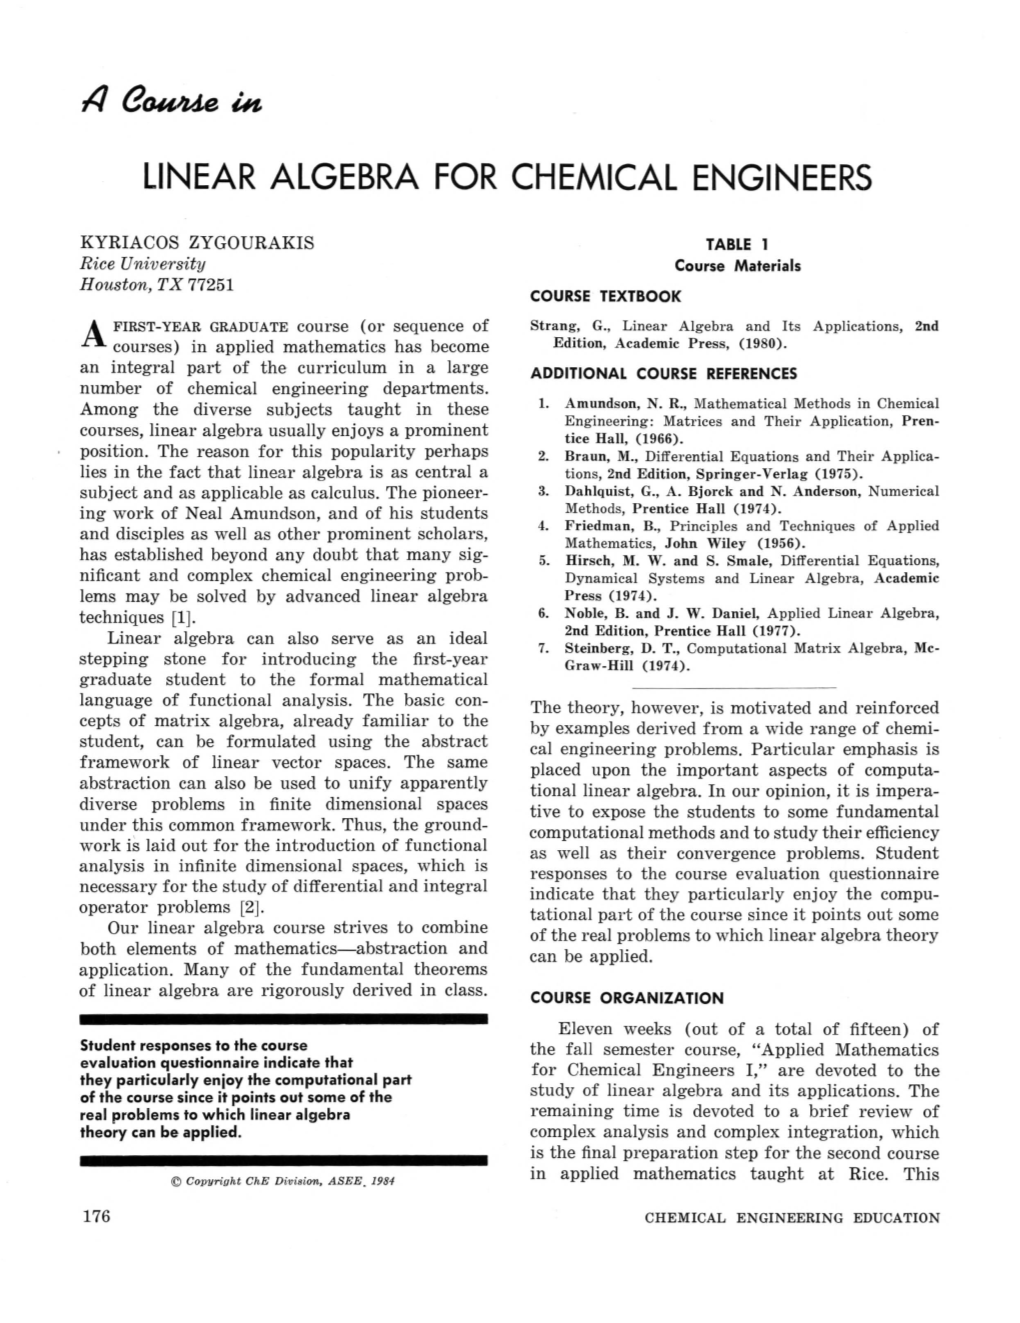 Linear Algebra for Chemical Engineers